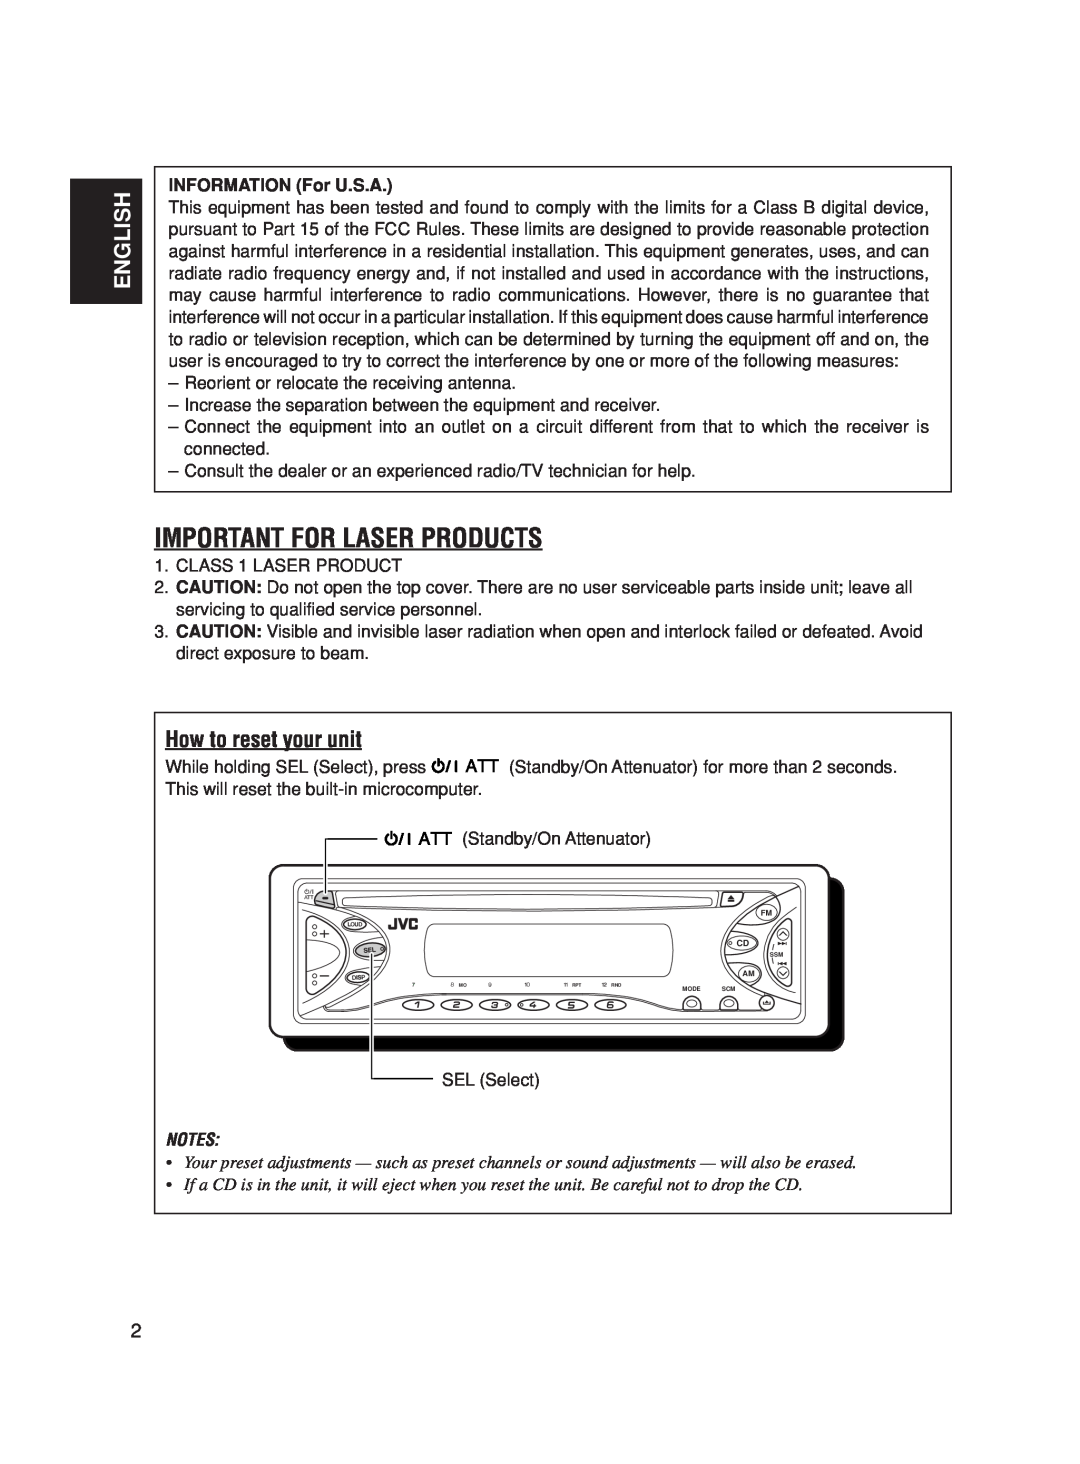 JVC KD-S10, KD-S5050 manual Important For Laser Products, English, How to reset your unit 